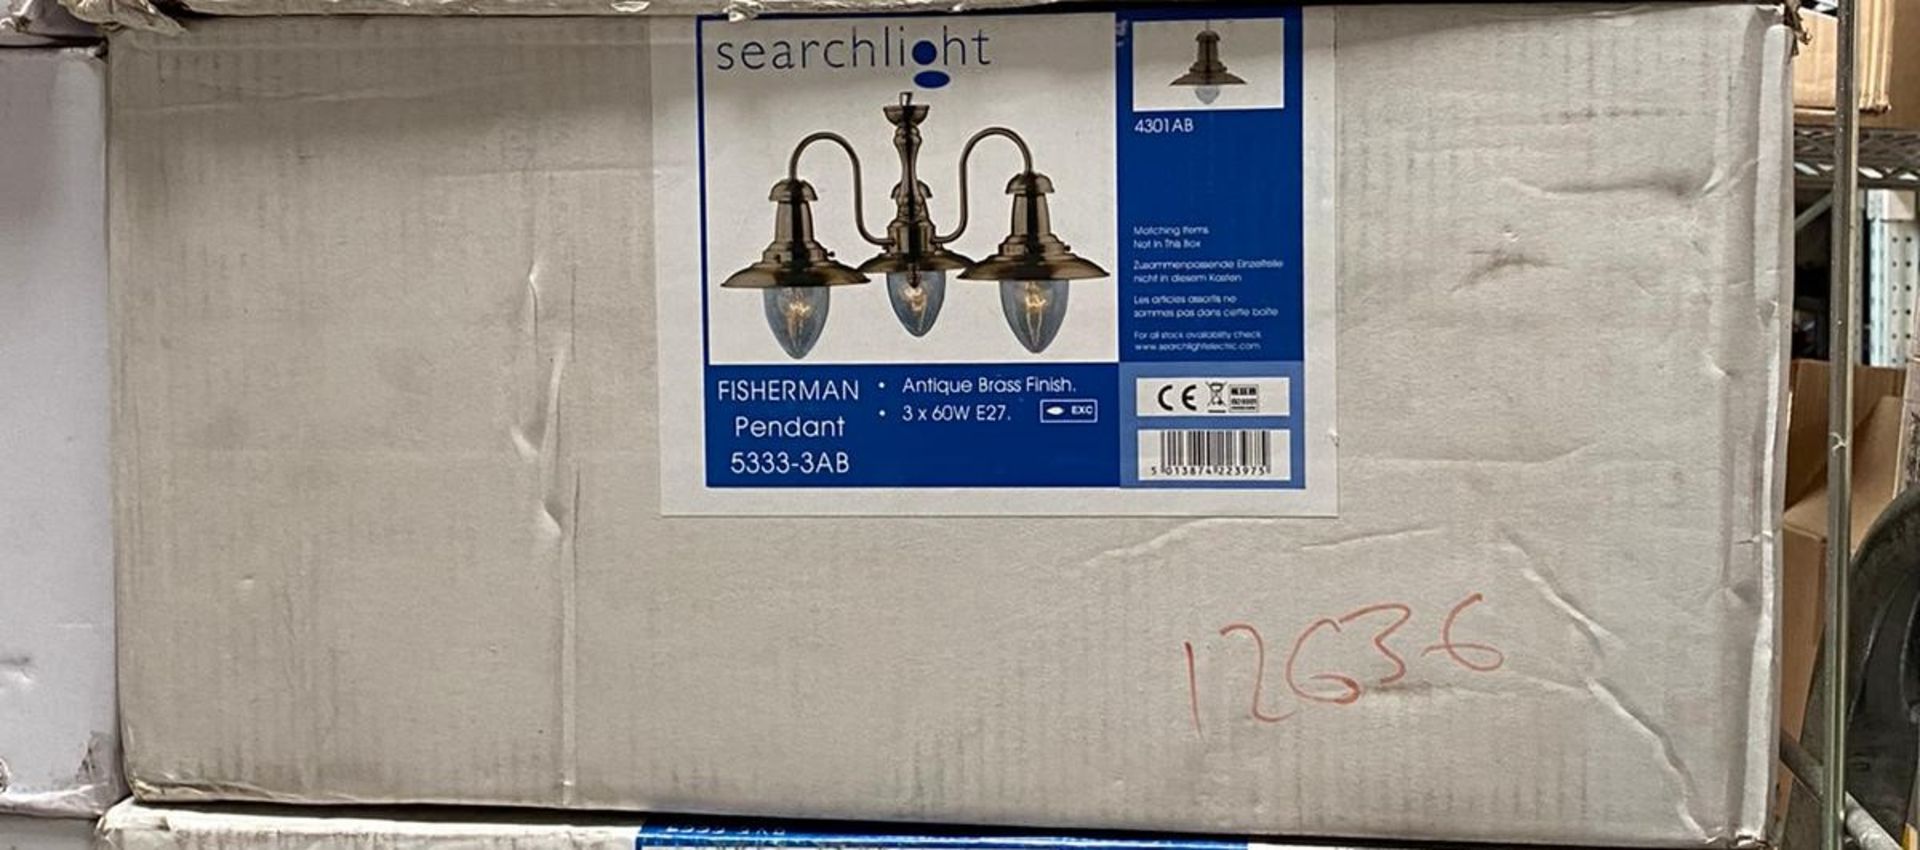 2 x Searchlight Fisherman Antique Brass 3 light Fitting - Ref: 5333-3AB - New Boxed - RRP: £144 each - Image 2 of 4